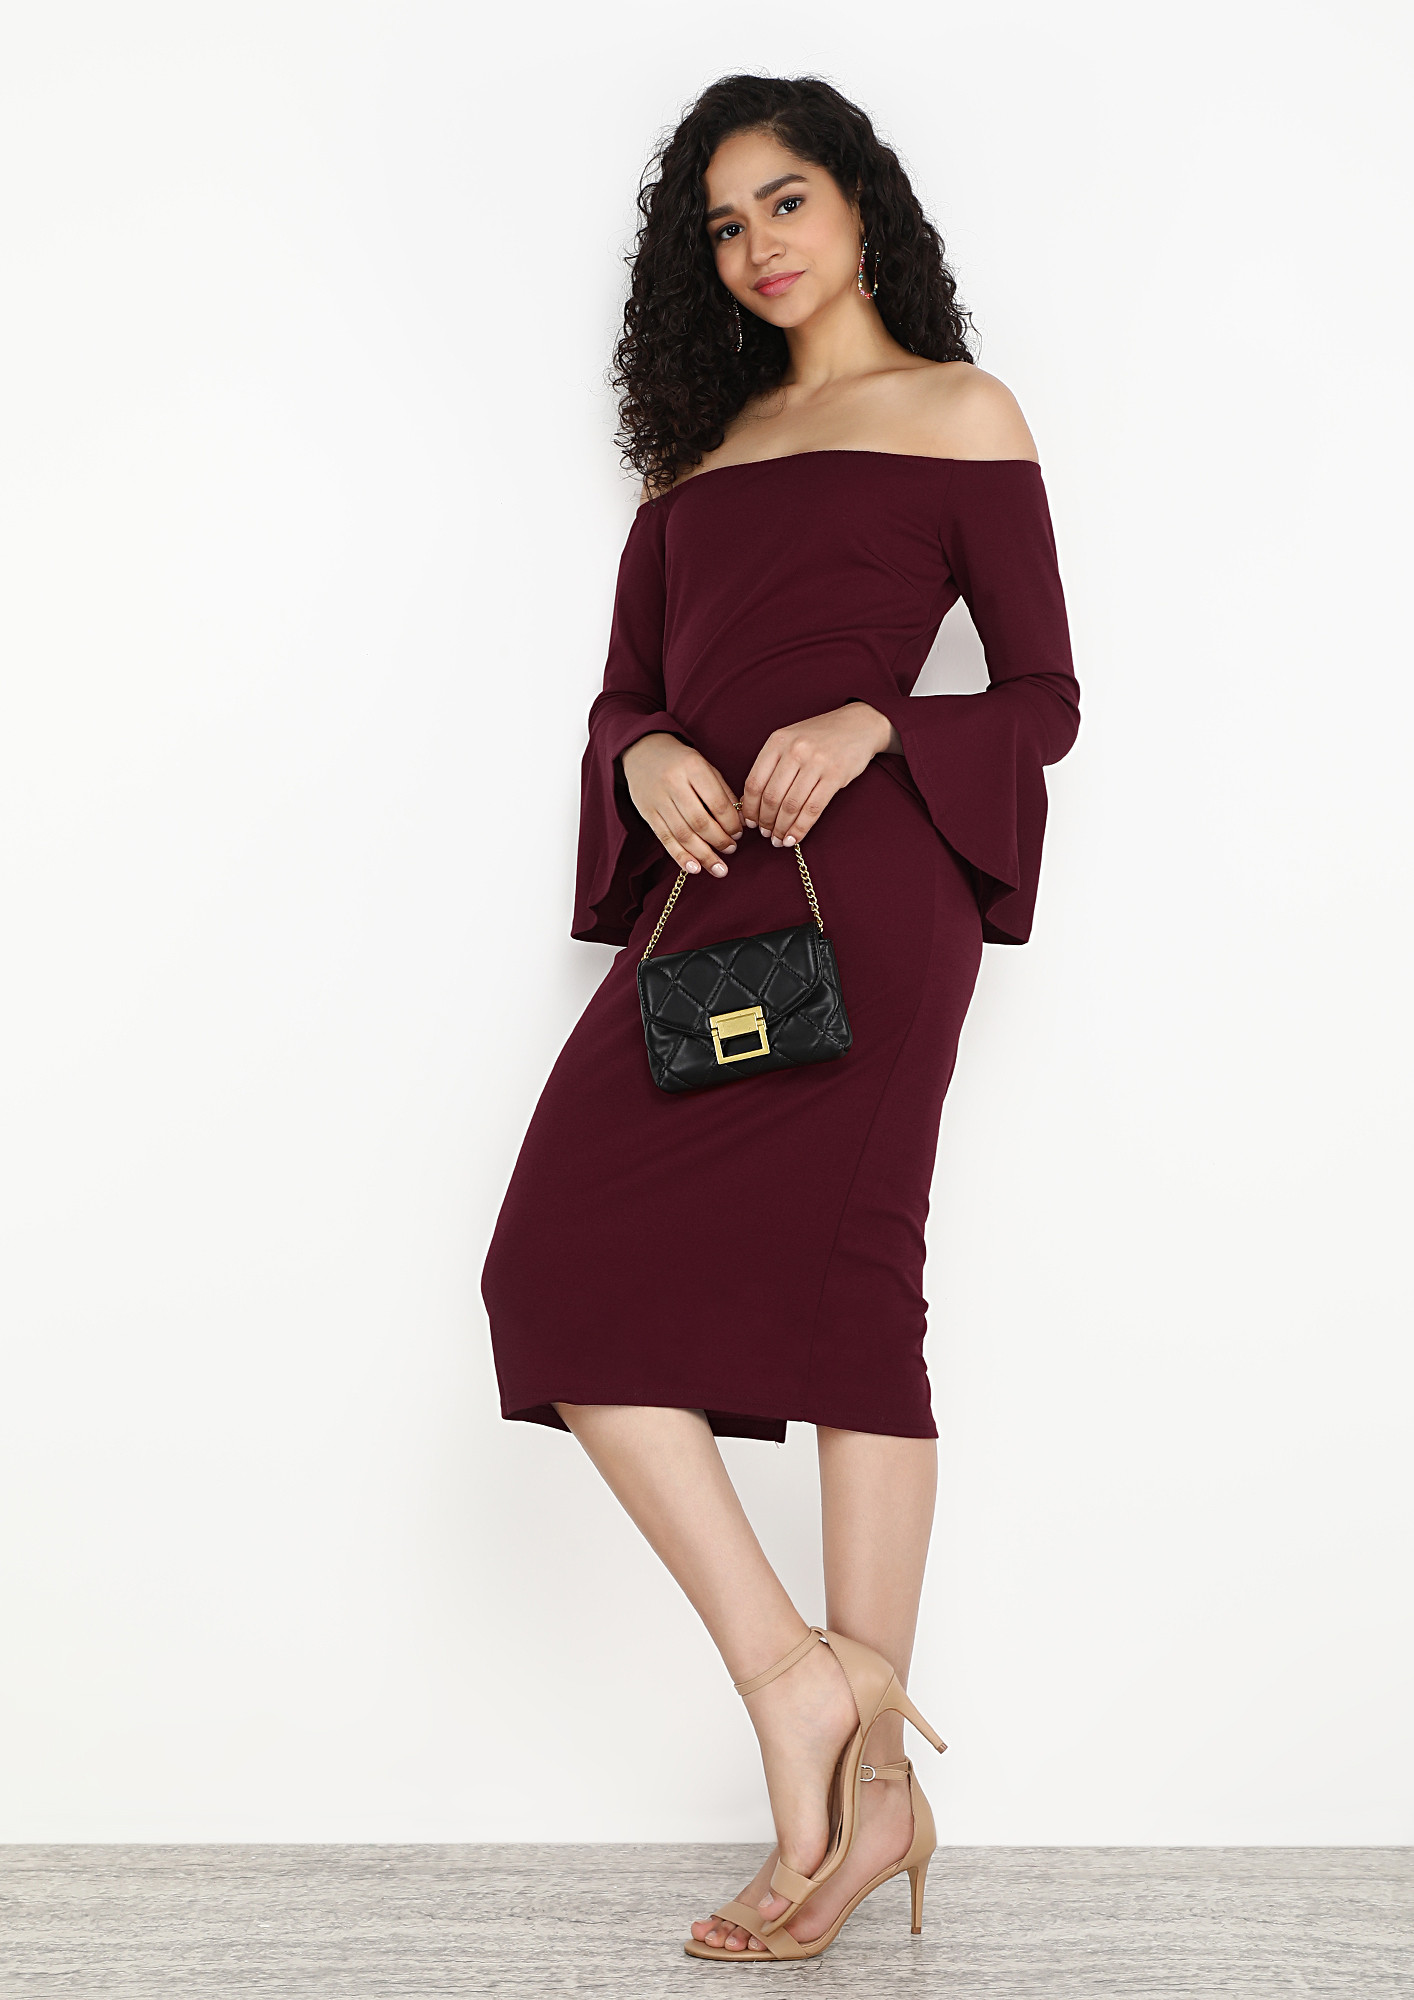 AWESOME-NESS-STY-1151, ZIP FLY BACK CLOSURE, FRILL CUFFS, MIDI, MAROON, OFF-SHOULDER DRESS